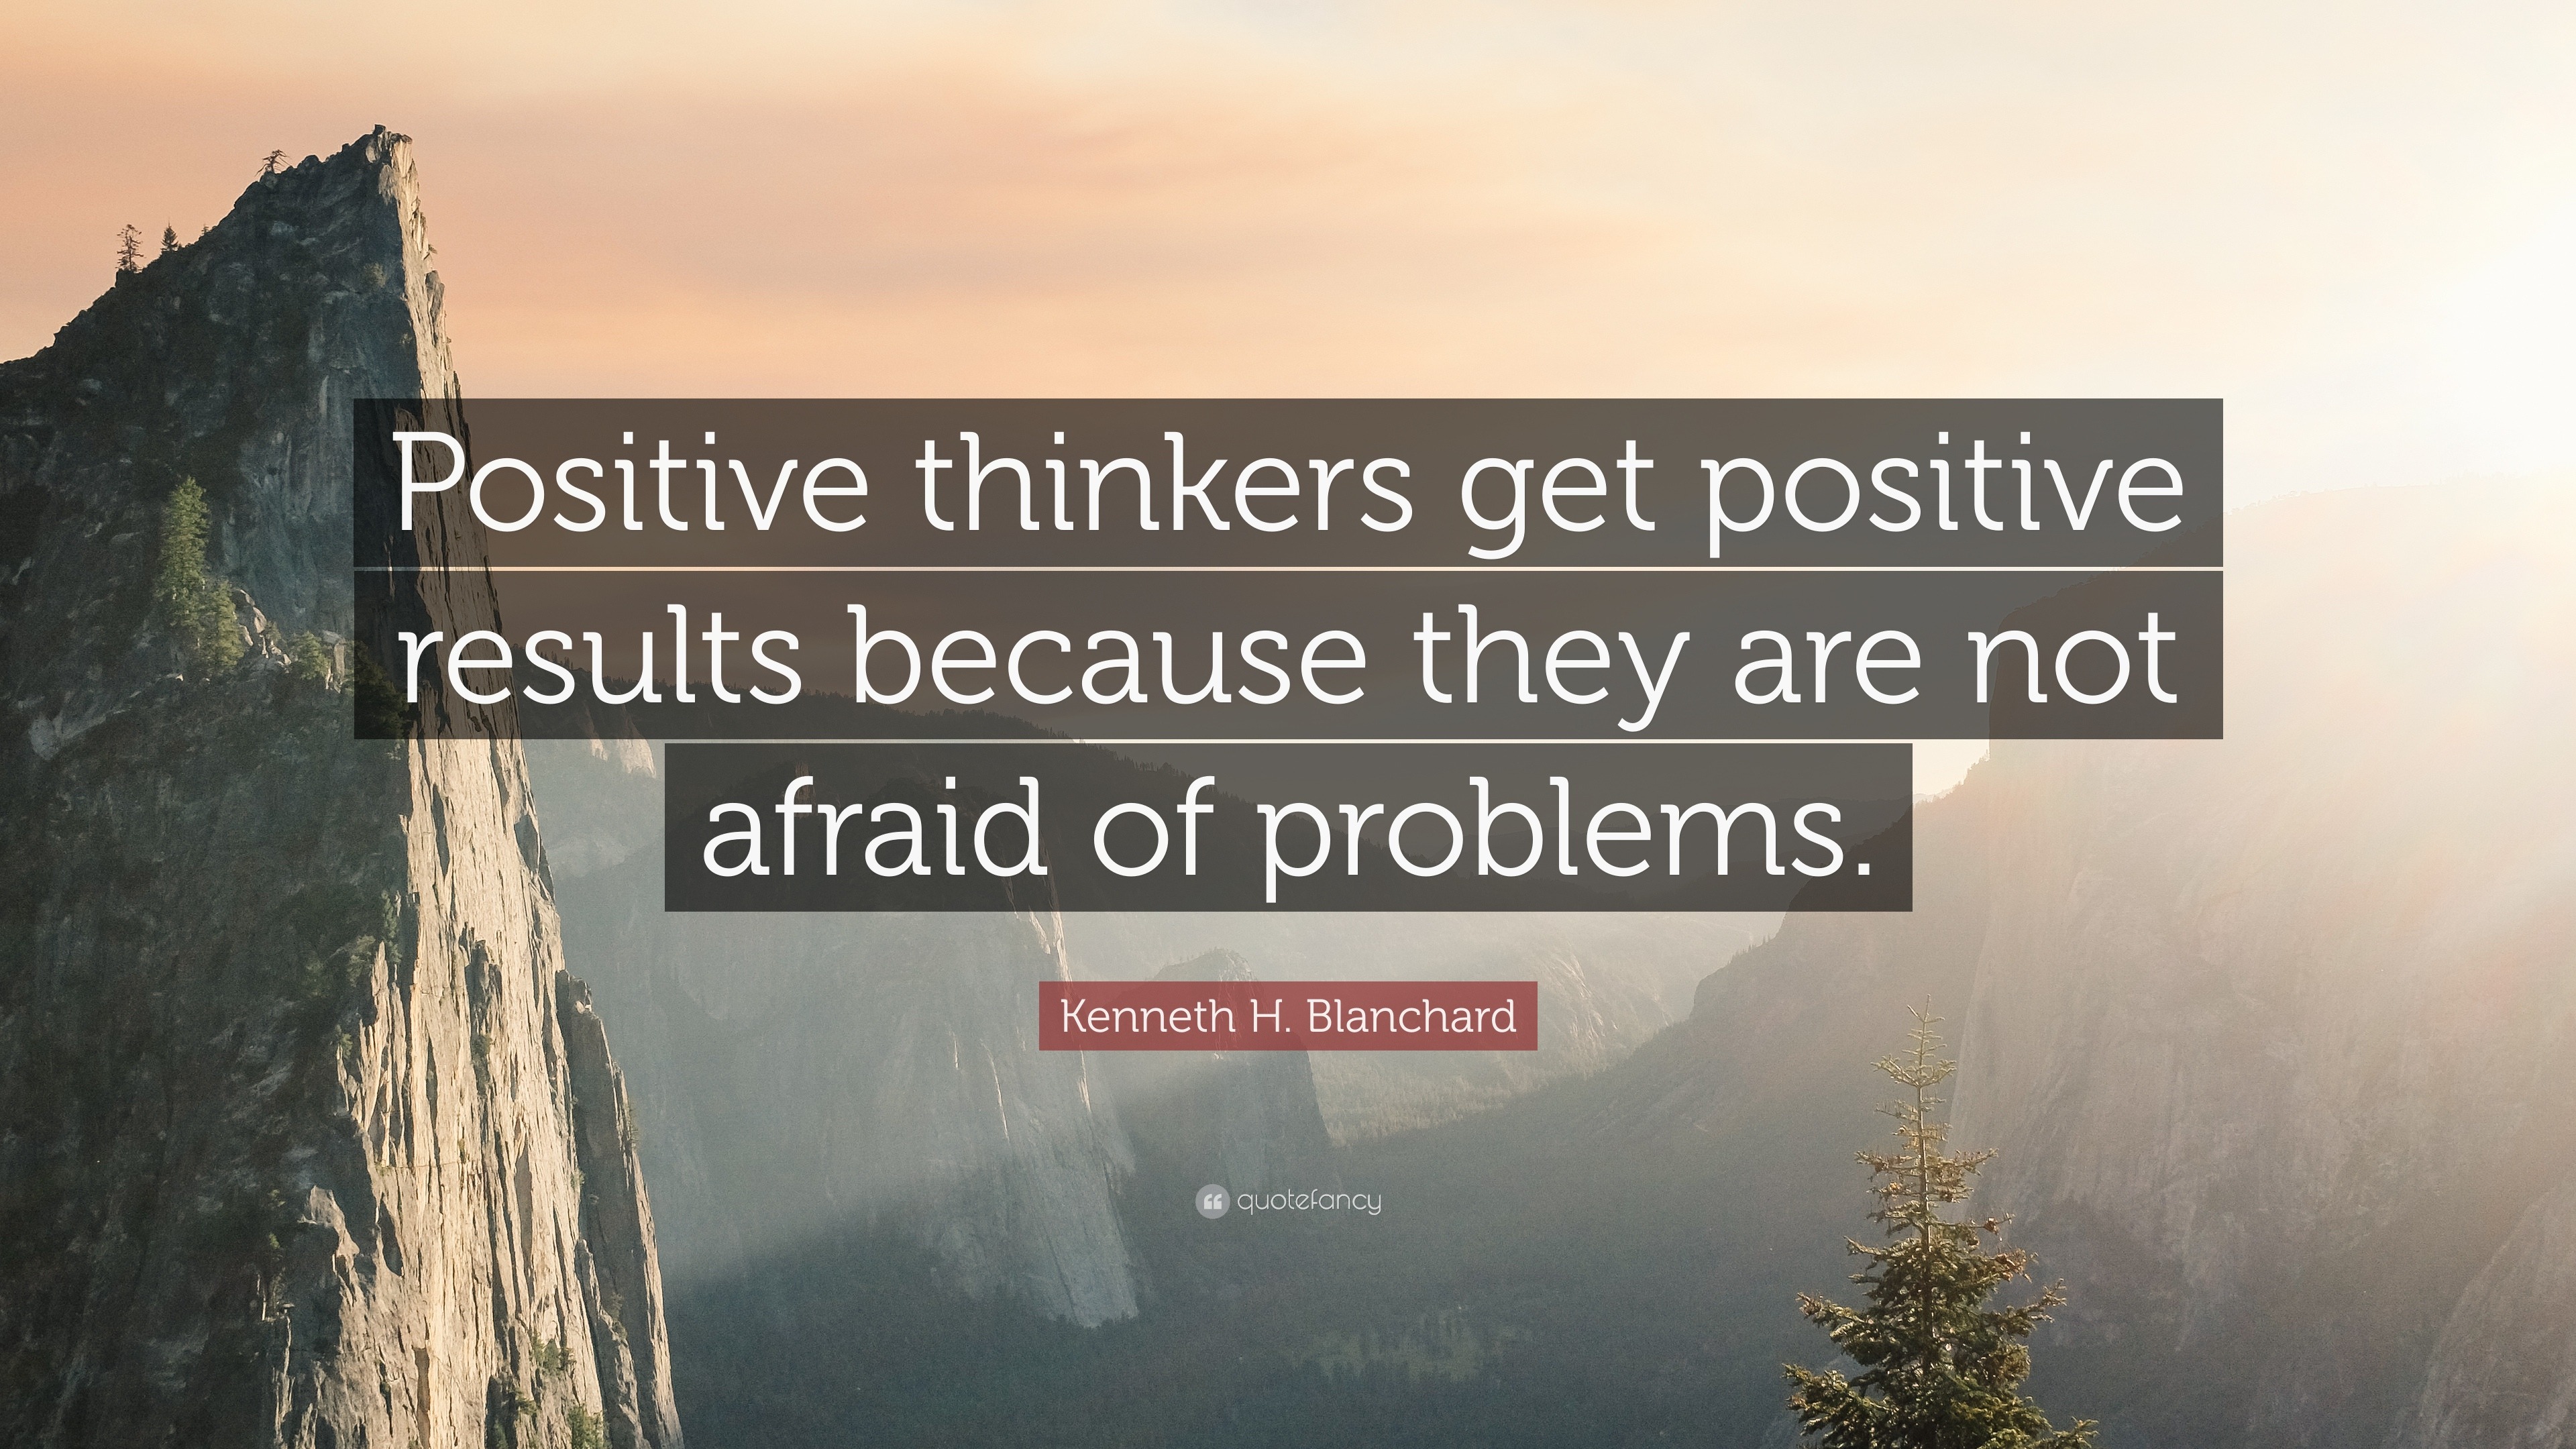 Kenneth H. Blanchard Quote: “Positive thinkers get positive results